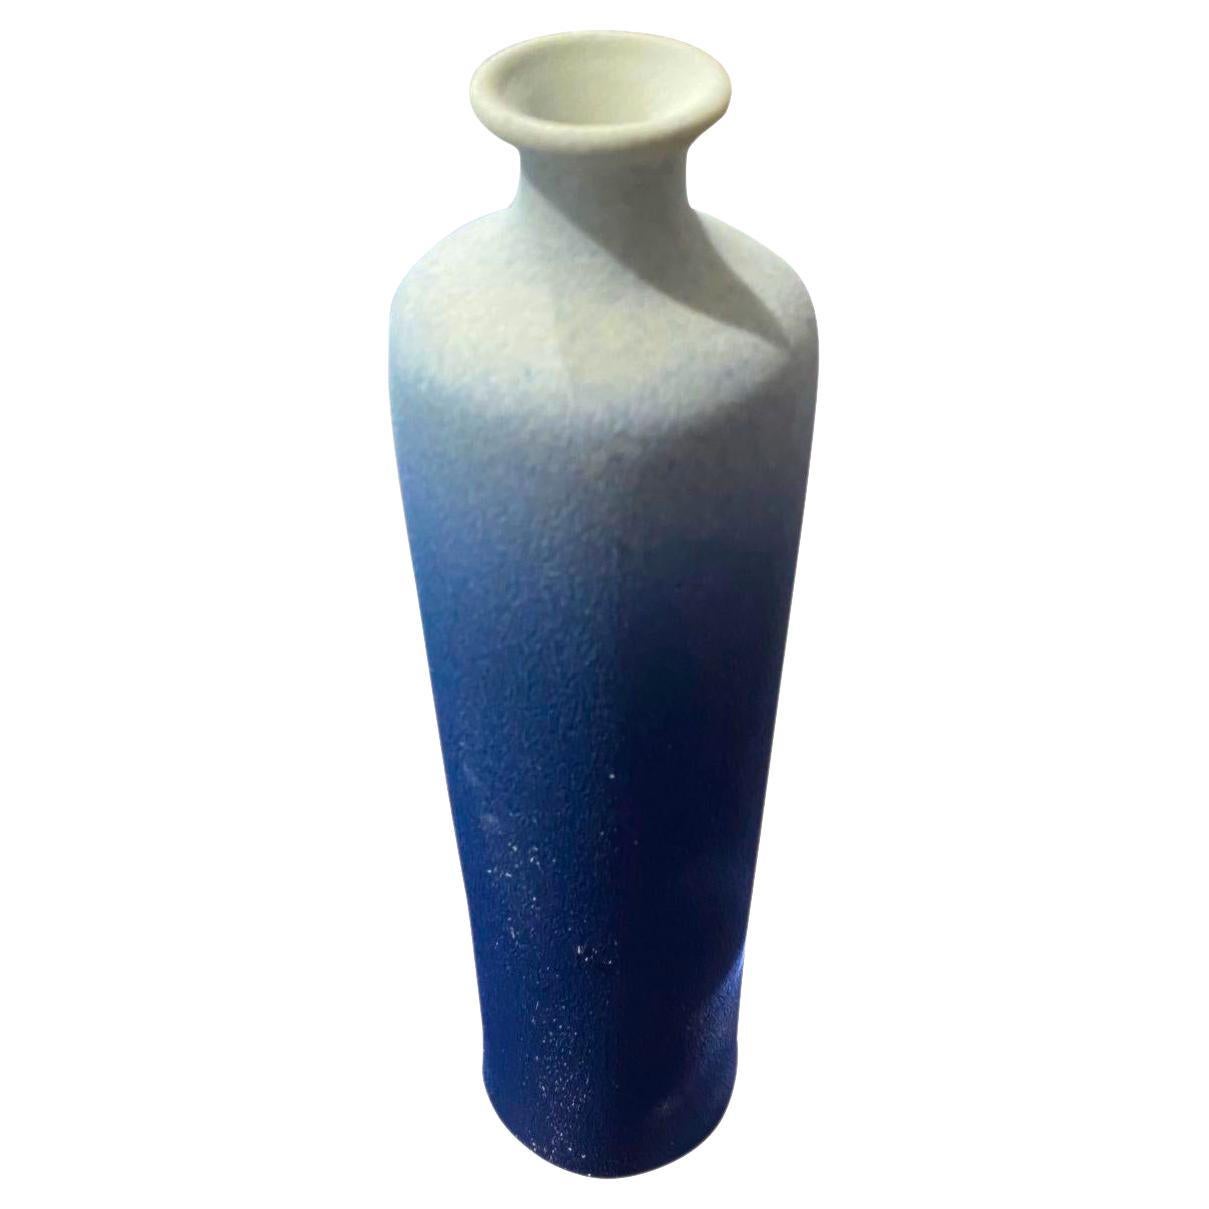 Contemporary Chinese ombre blue glazed vase.
Tall thin spout opening.
Part of a large collection.